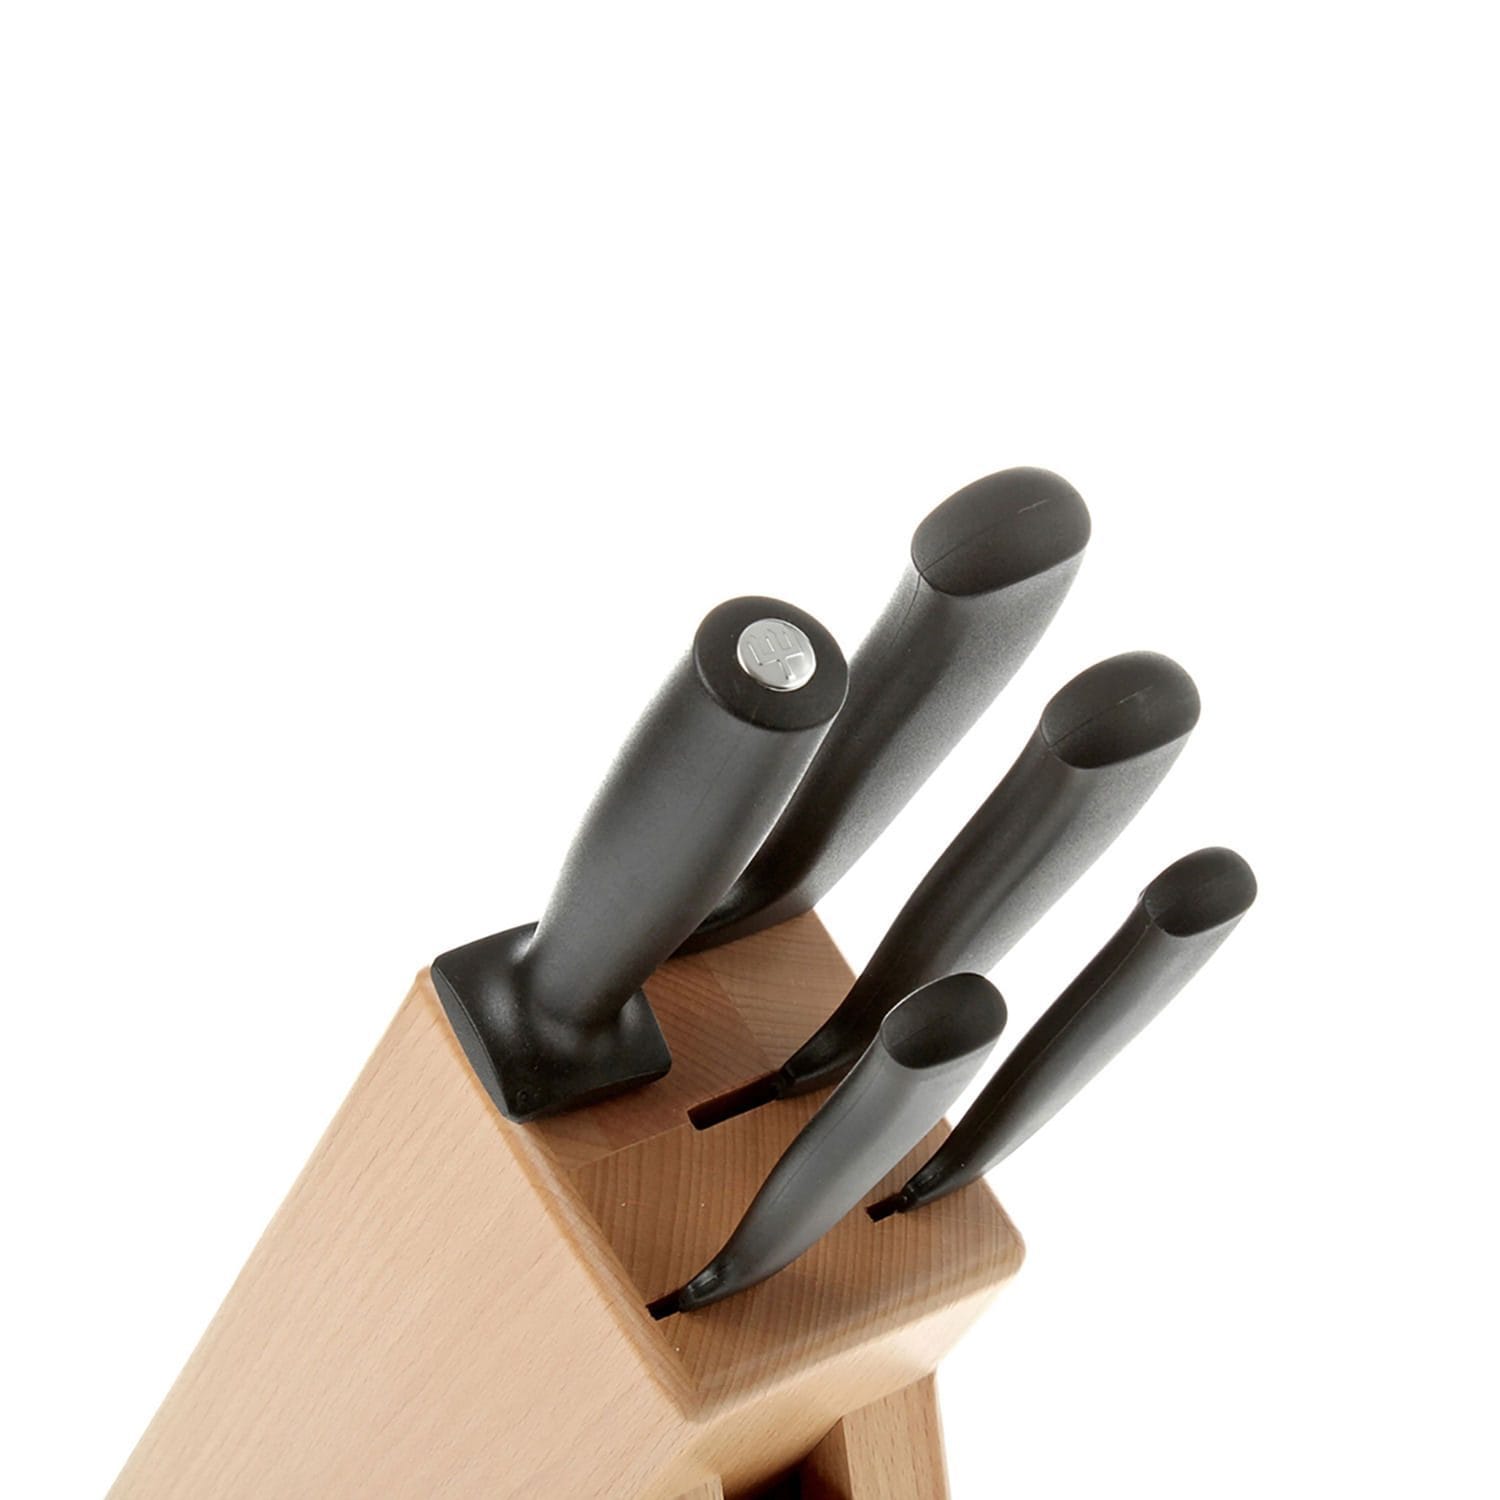 Wusthof Classic Ikon Knife Block with Set of 5 Knives - Multicolour - 9829 - Jashanmal Home